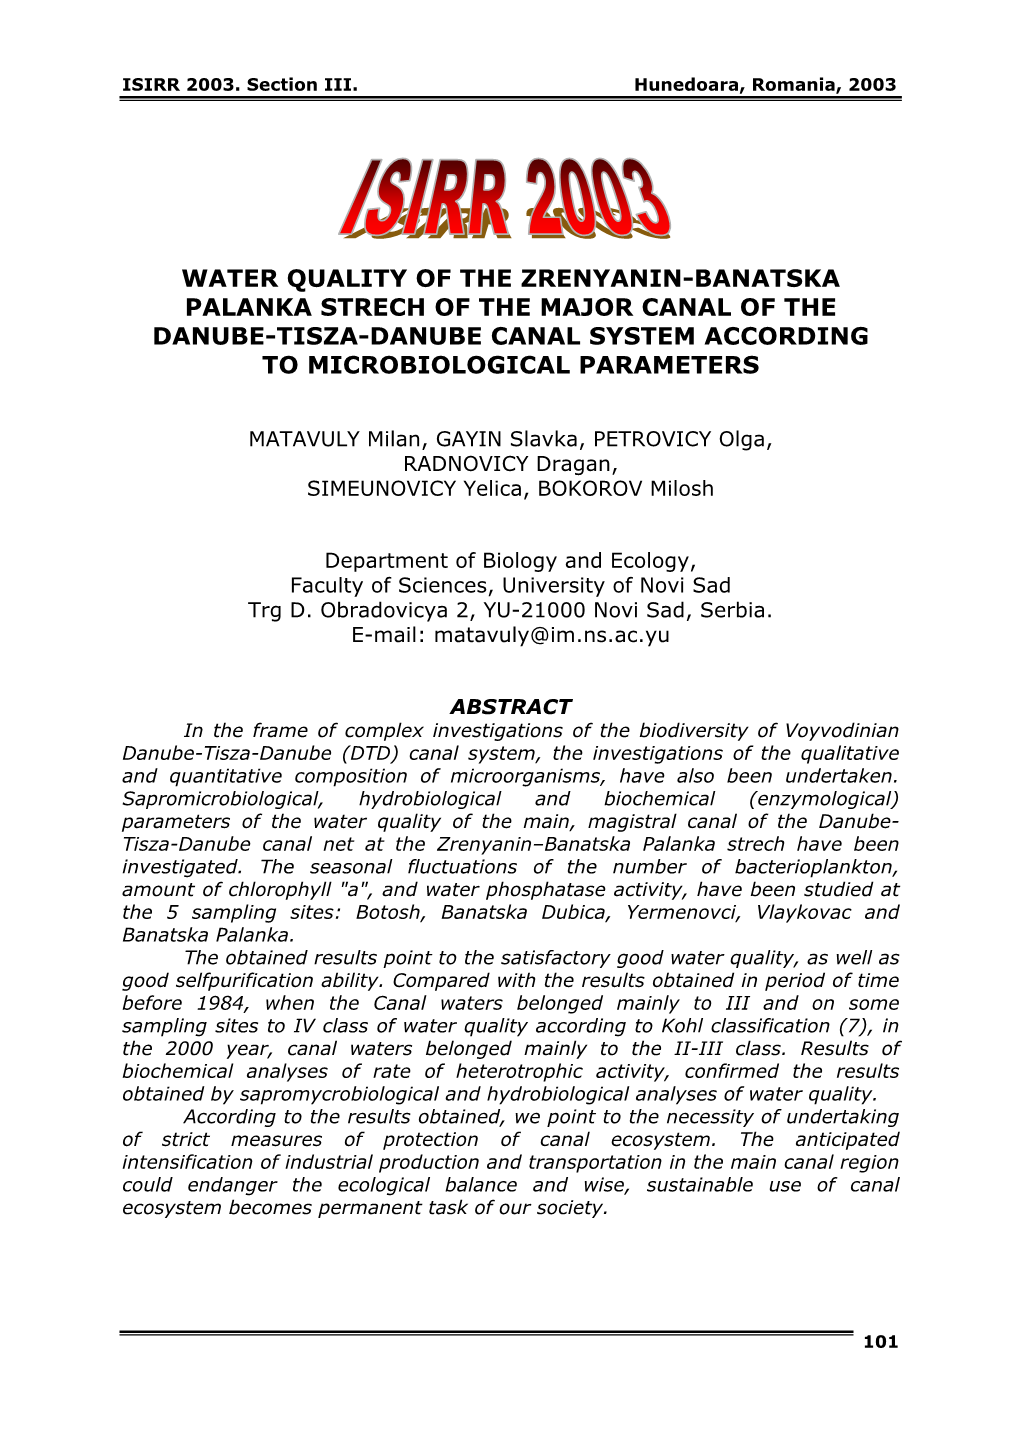 Water Quality of the Zrenyanin-Banatska Palanka Strech of the Major Canal of the Danube-Tisza-Danube Canal System According to Microbiological Parameters